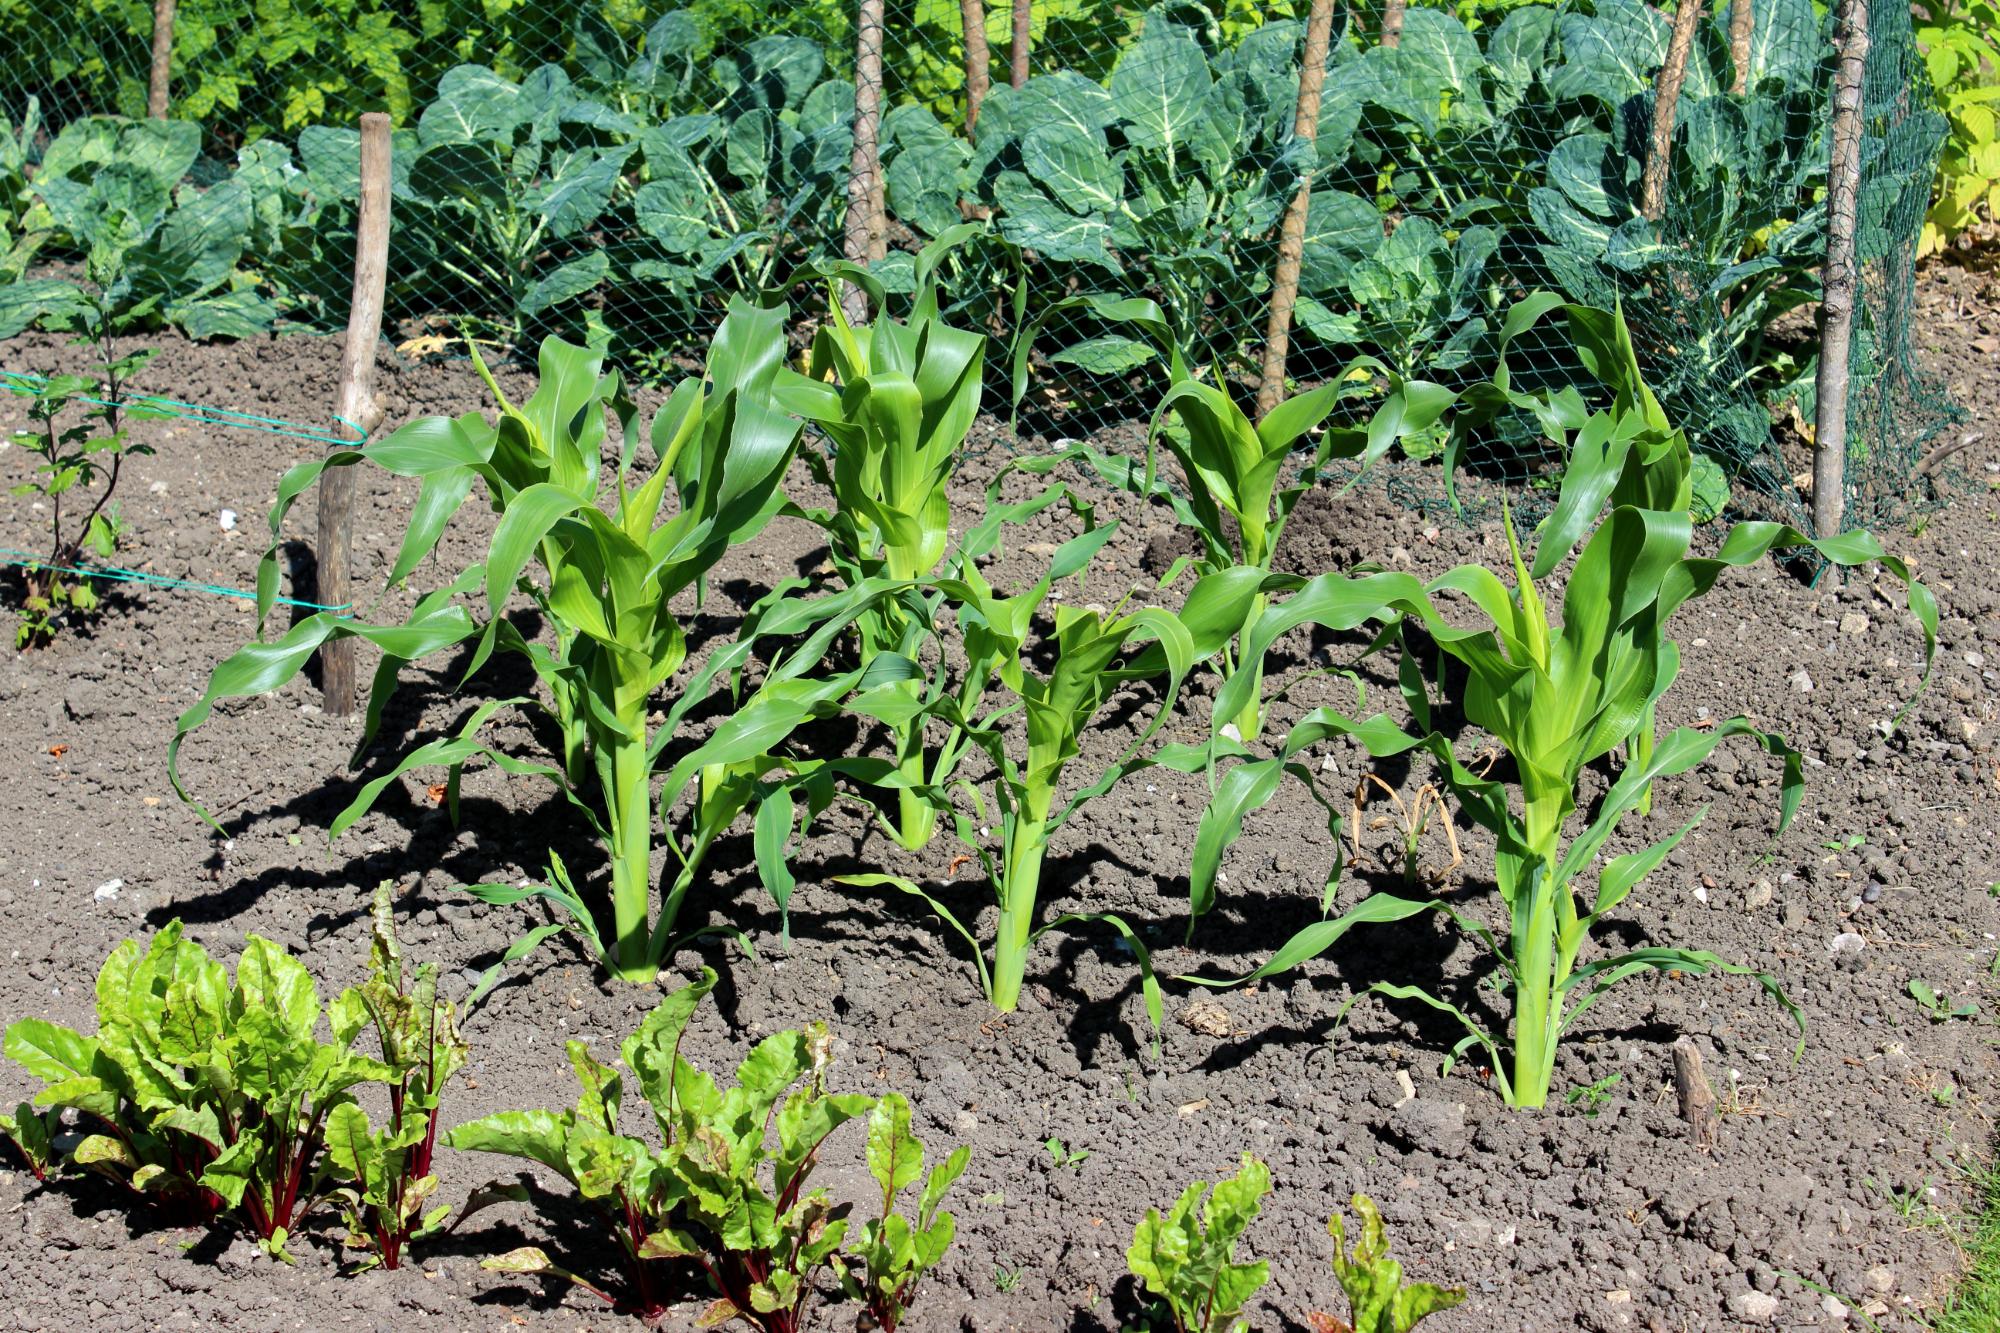 Allotment vegetable garden with maize / corn on the cob plants